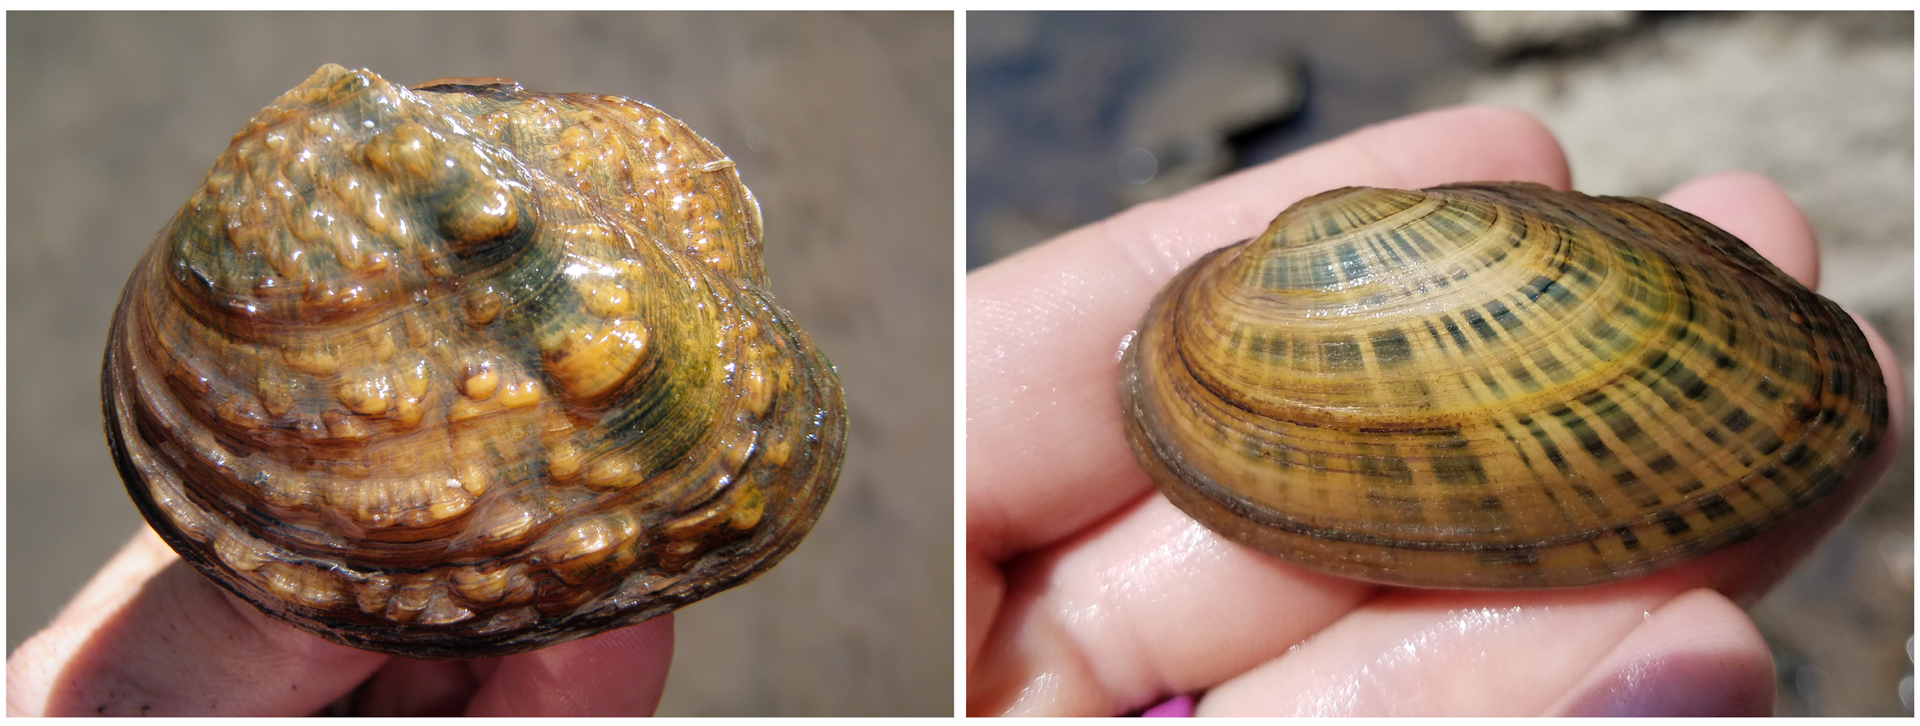 The&amp;amp;amp;amp;nbsp;Monkeyface mussel (left) and the Rainbow mussel (right), both listed as endangered species in Illinois, symbolize the critical need for conservation efforts amidst infrastructure expansion.&amp;amp;amp;amp;nbsp; Photos by Alison Stodola and Rachel Vinsel.